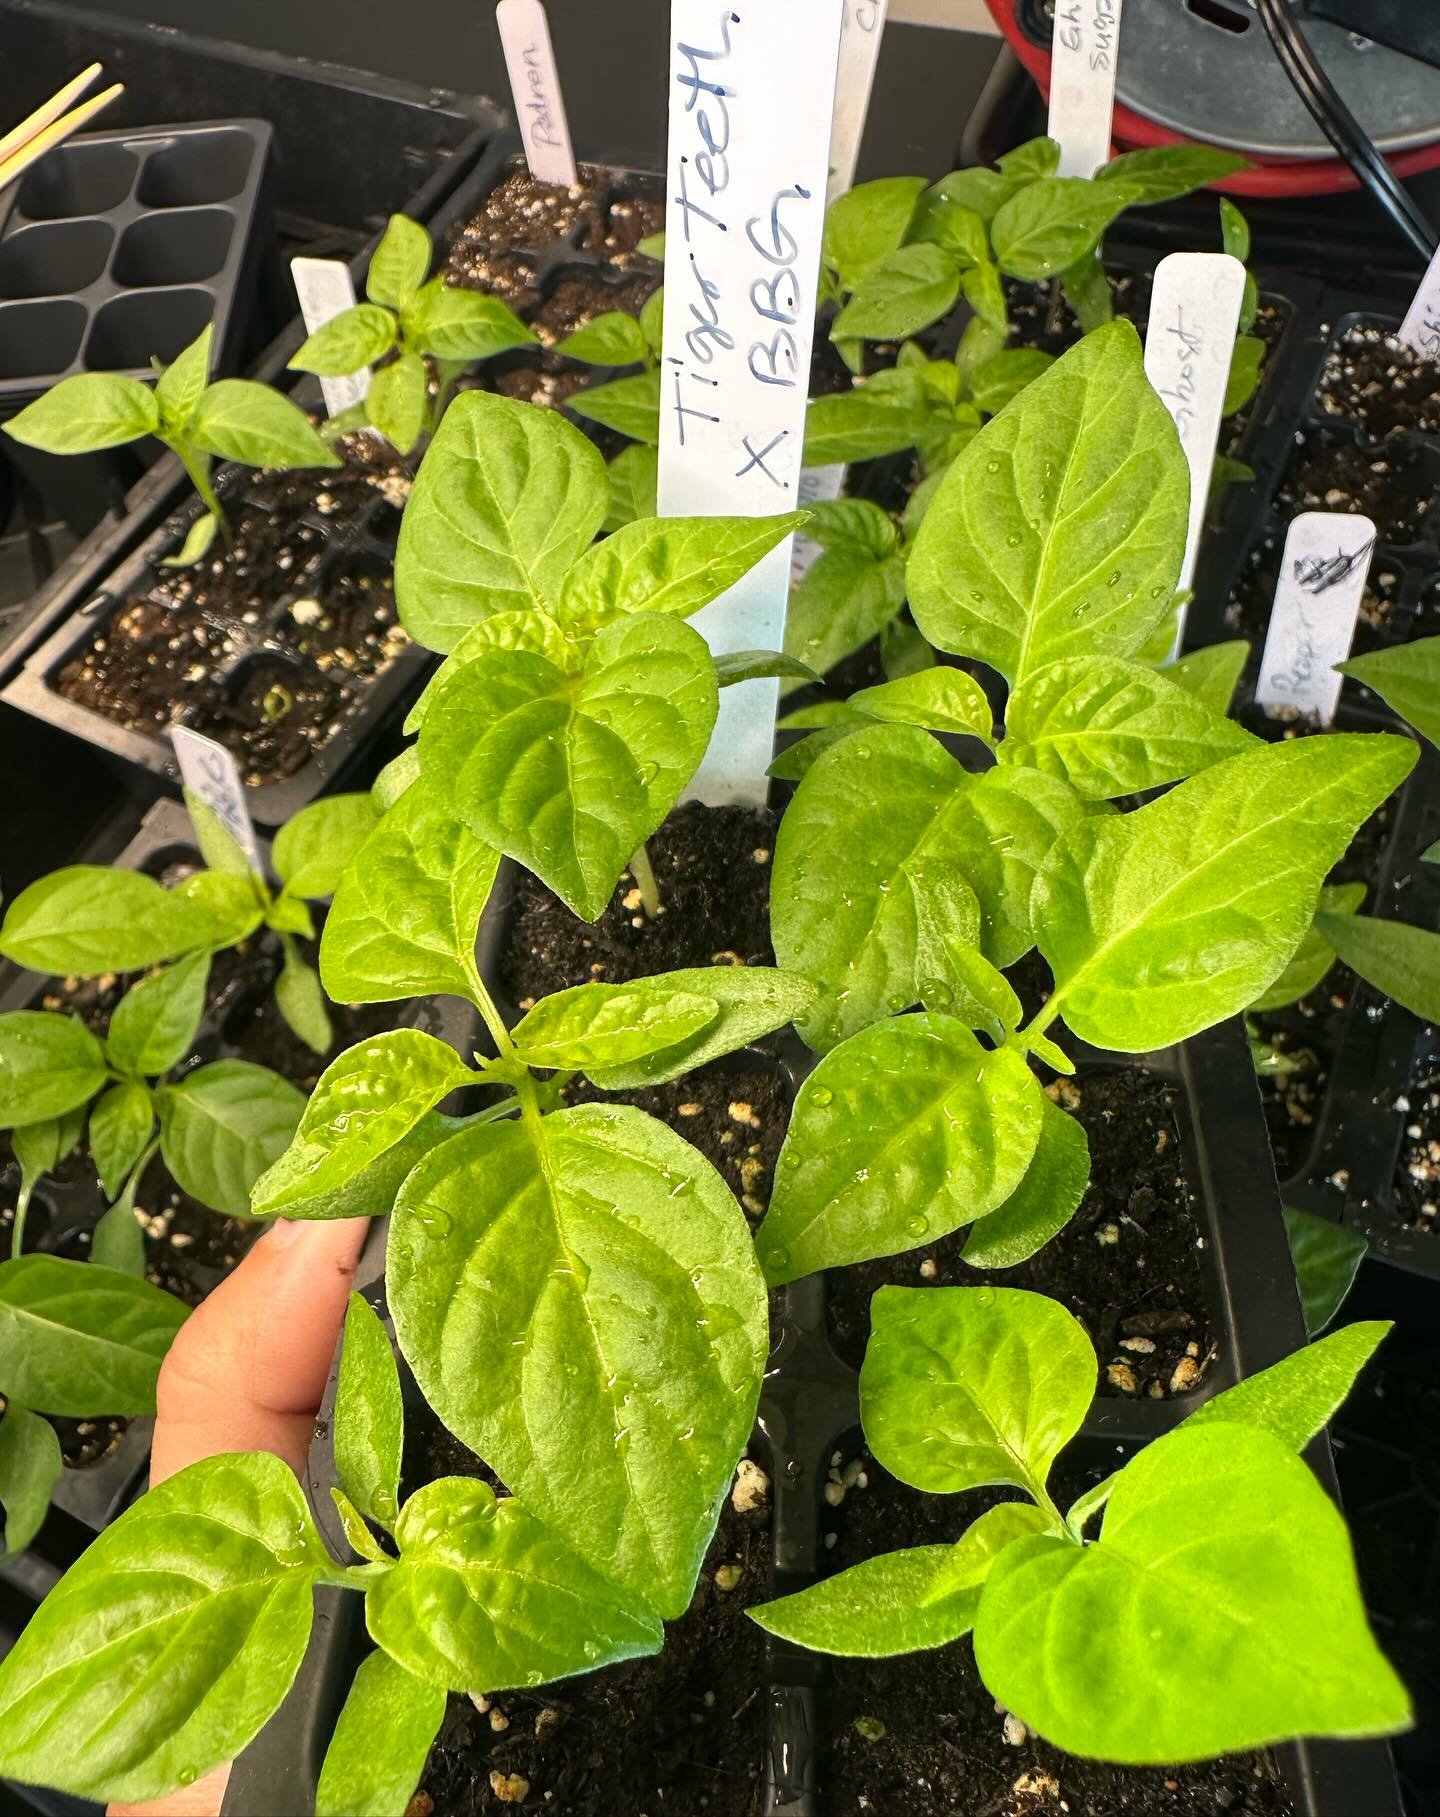 A PEPPER QUEEN UPDATE:
These are some of my hotties for this year for the upcoming limited seasonal batches. These are all germinated from seed and certified organic. 
What do you think?

Oh yeah and by the way, I&rsquo;m still here. I just had to ta